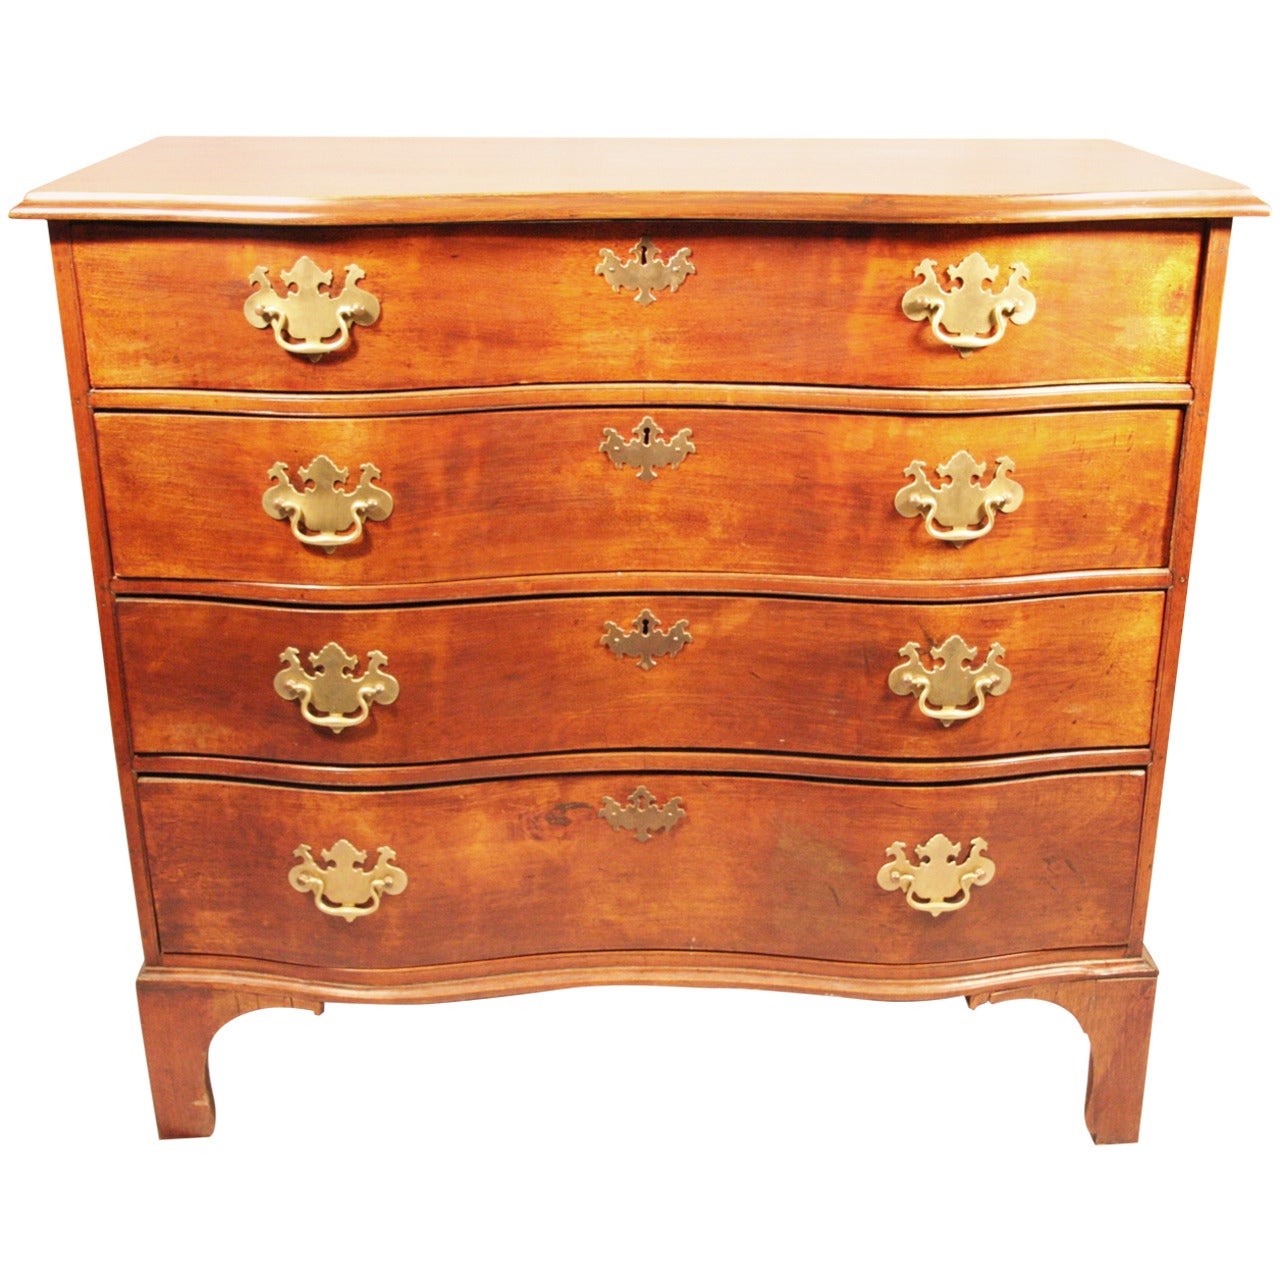 Mid-18th Century New England Maple Oxbow Chest of Drawers